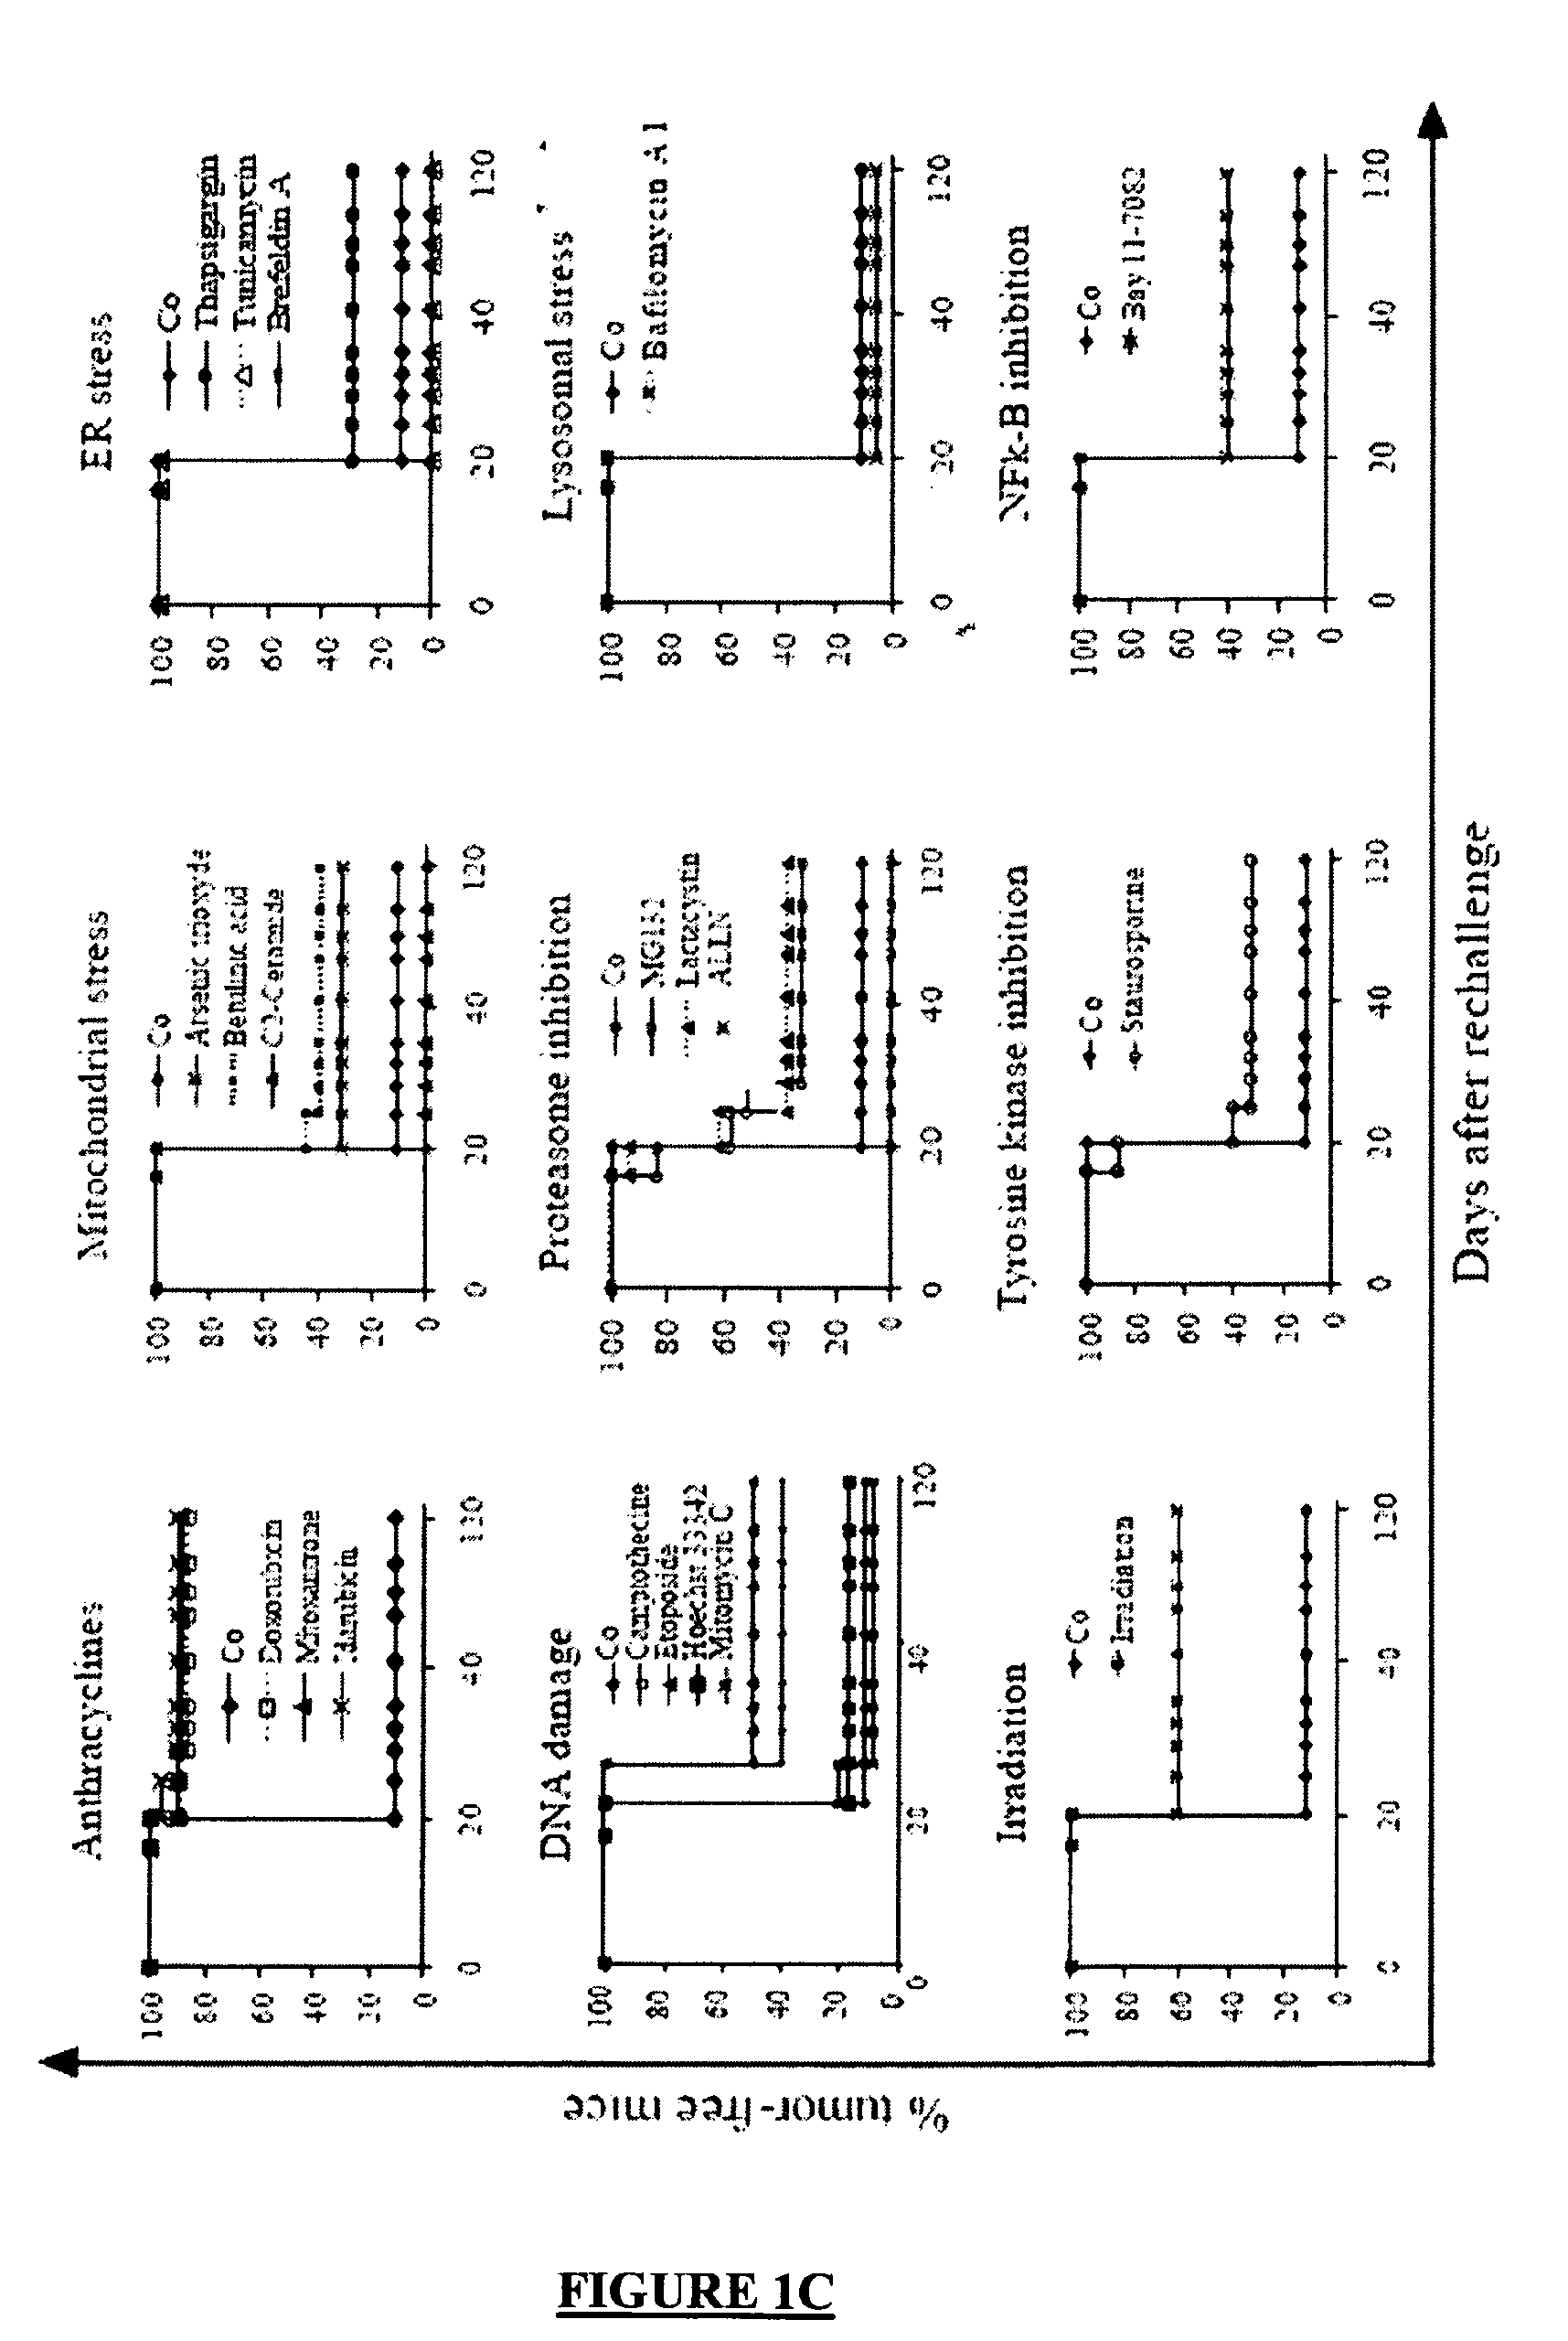 Compounds regulating calreticulin, KDEL receptor and/or Erp-57 cell surface exposure and uses thereof to evaluate the efficiency of a cancer treatment